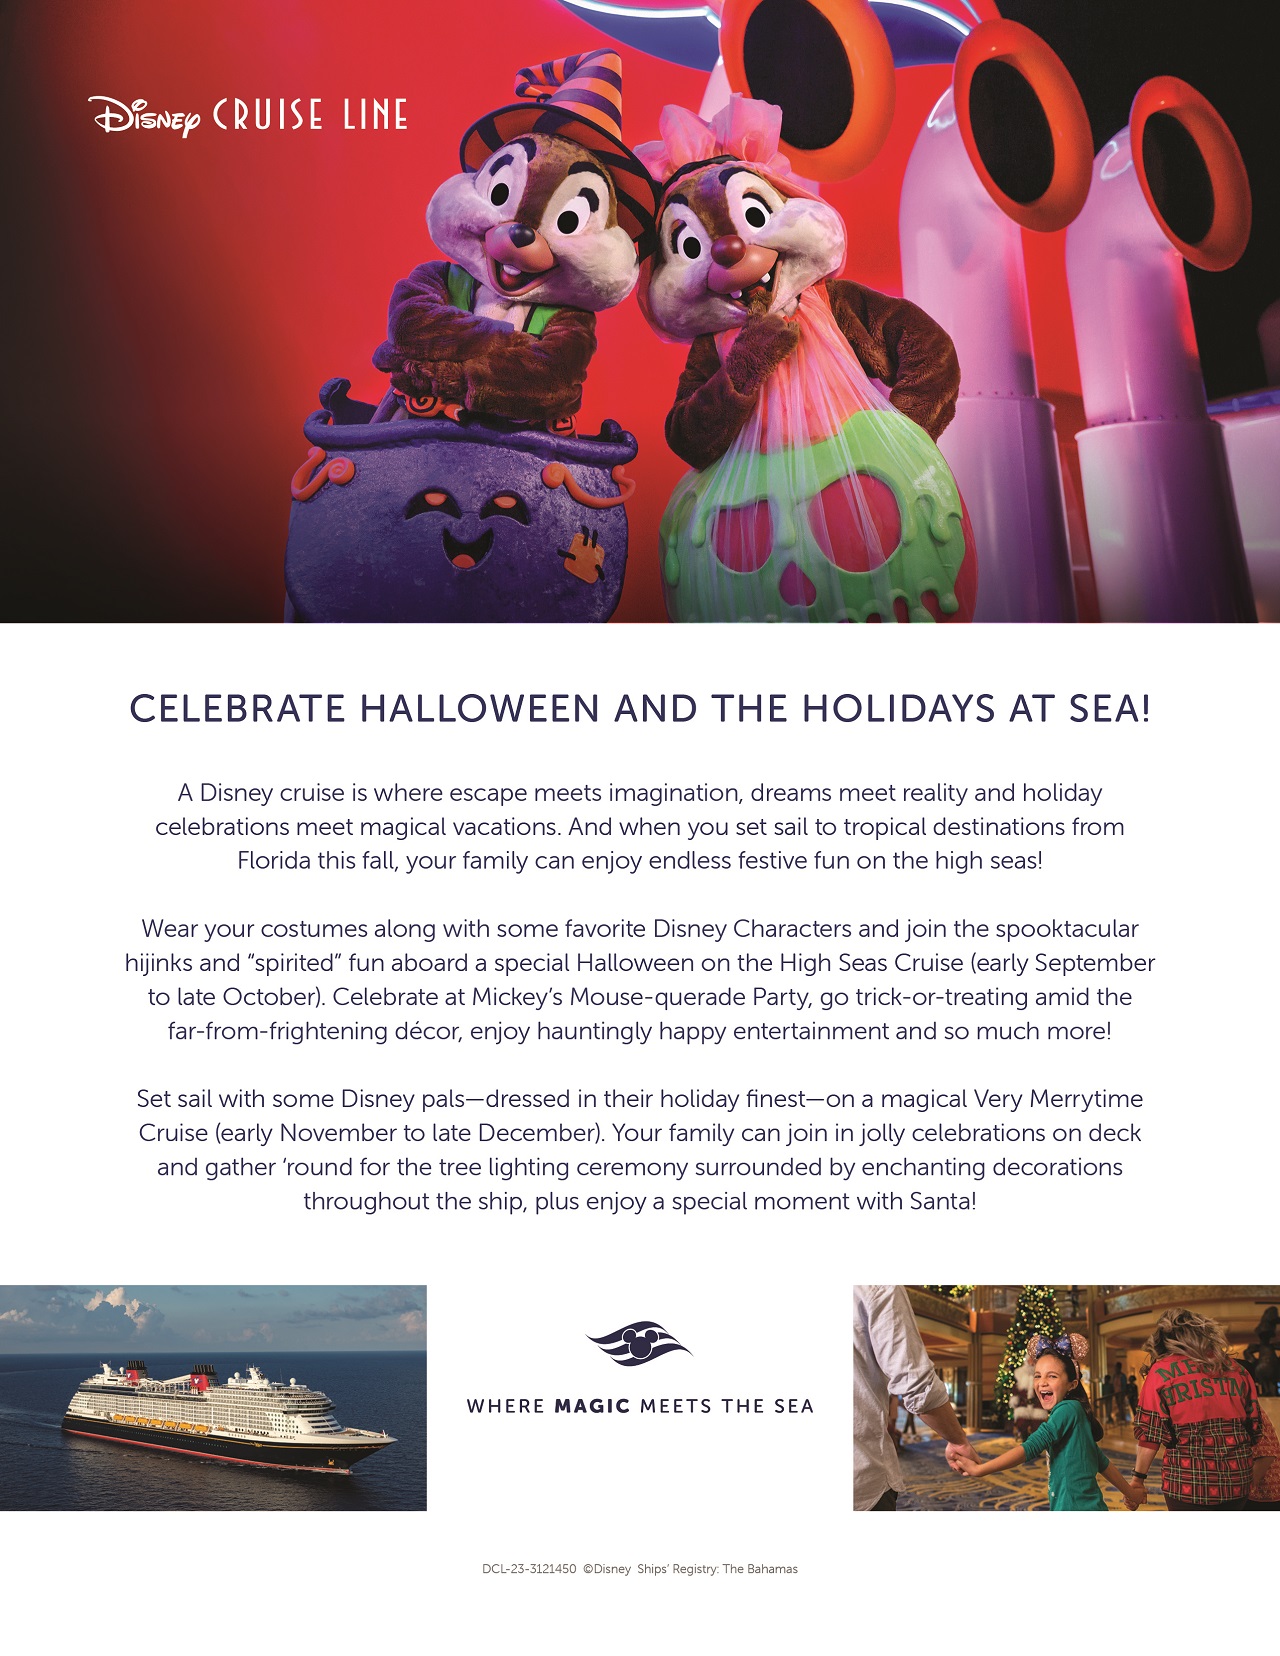 Halloween and the Holidays at Sea with Disney Cruise Line